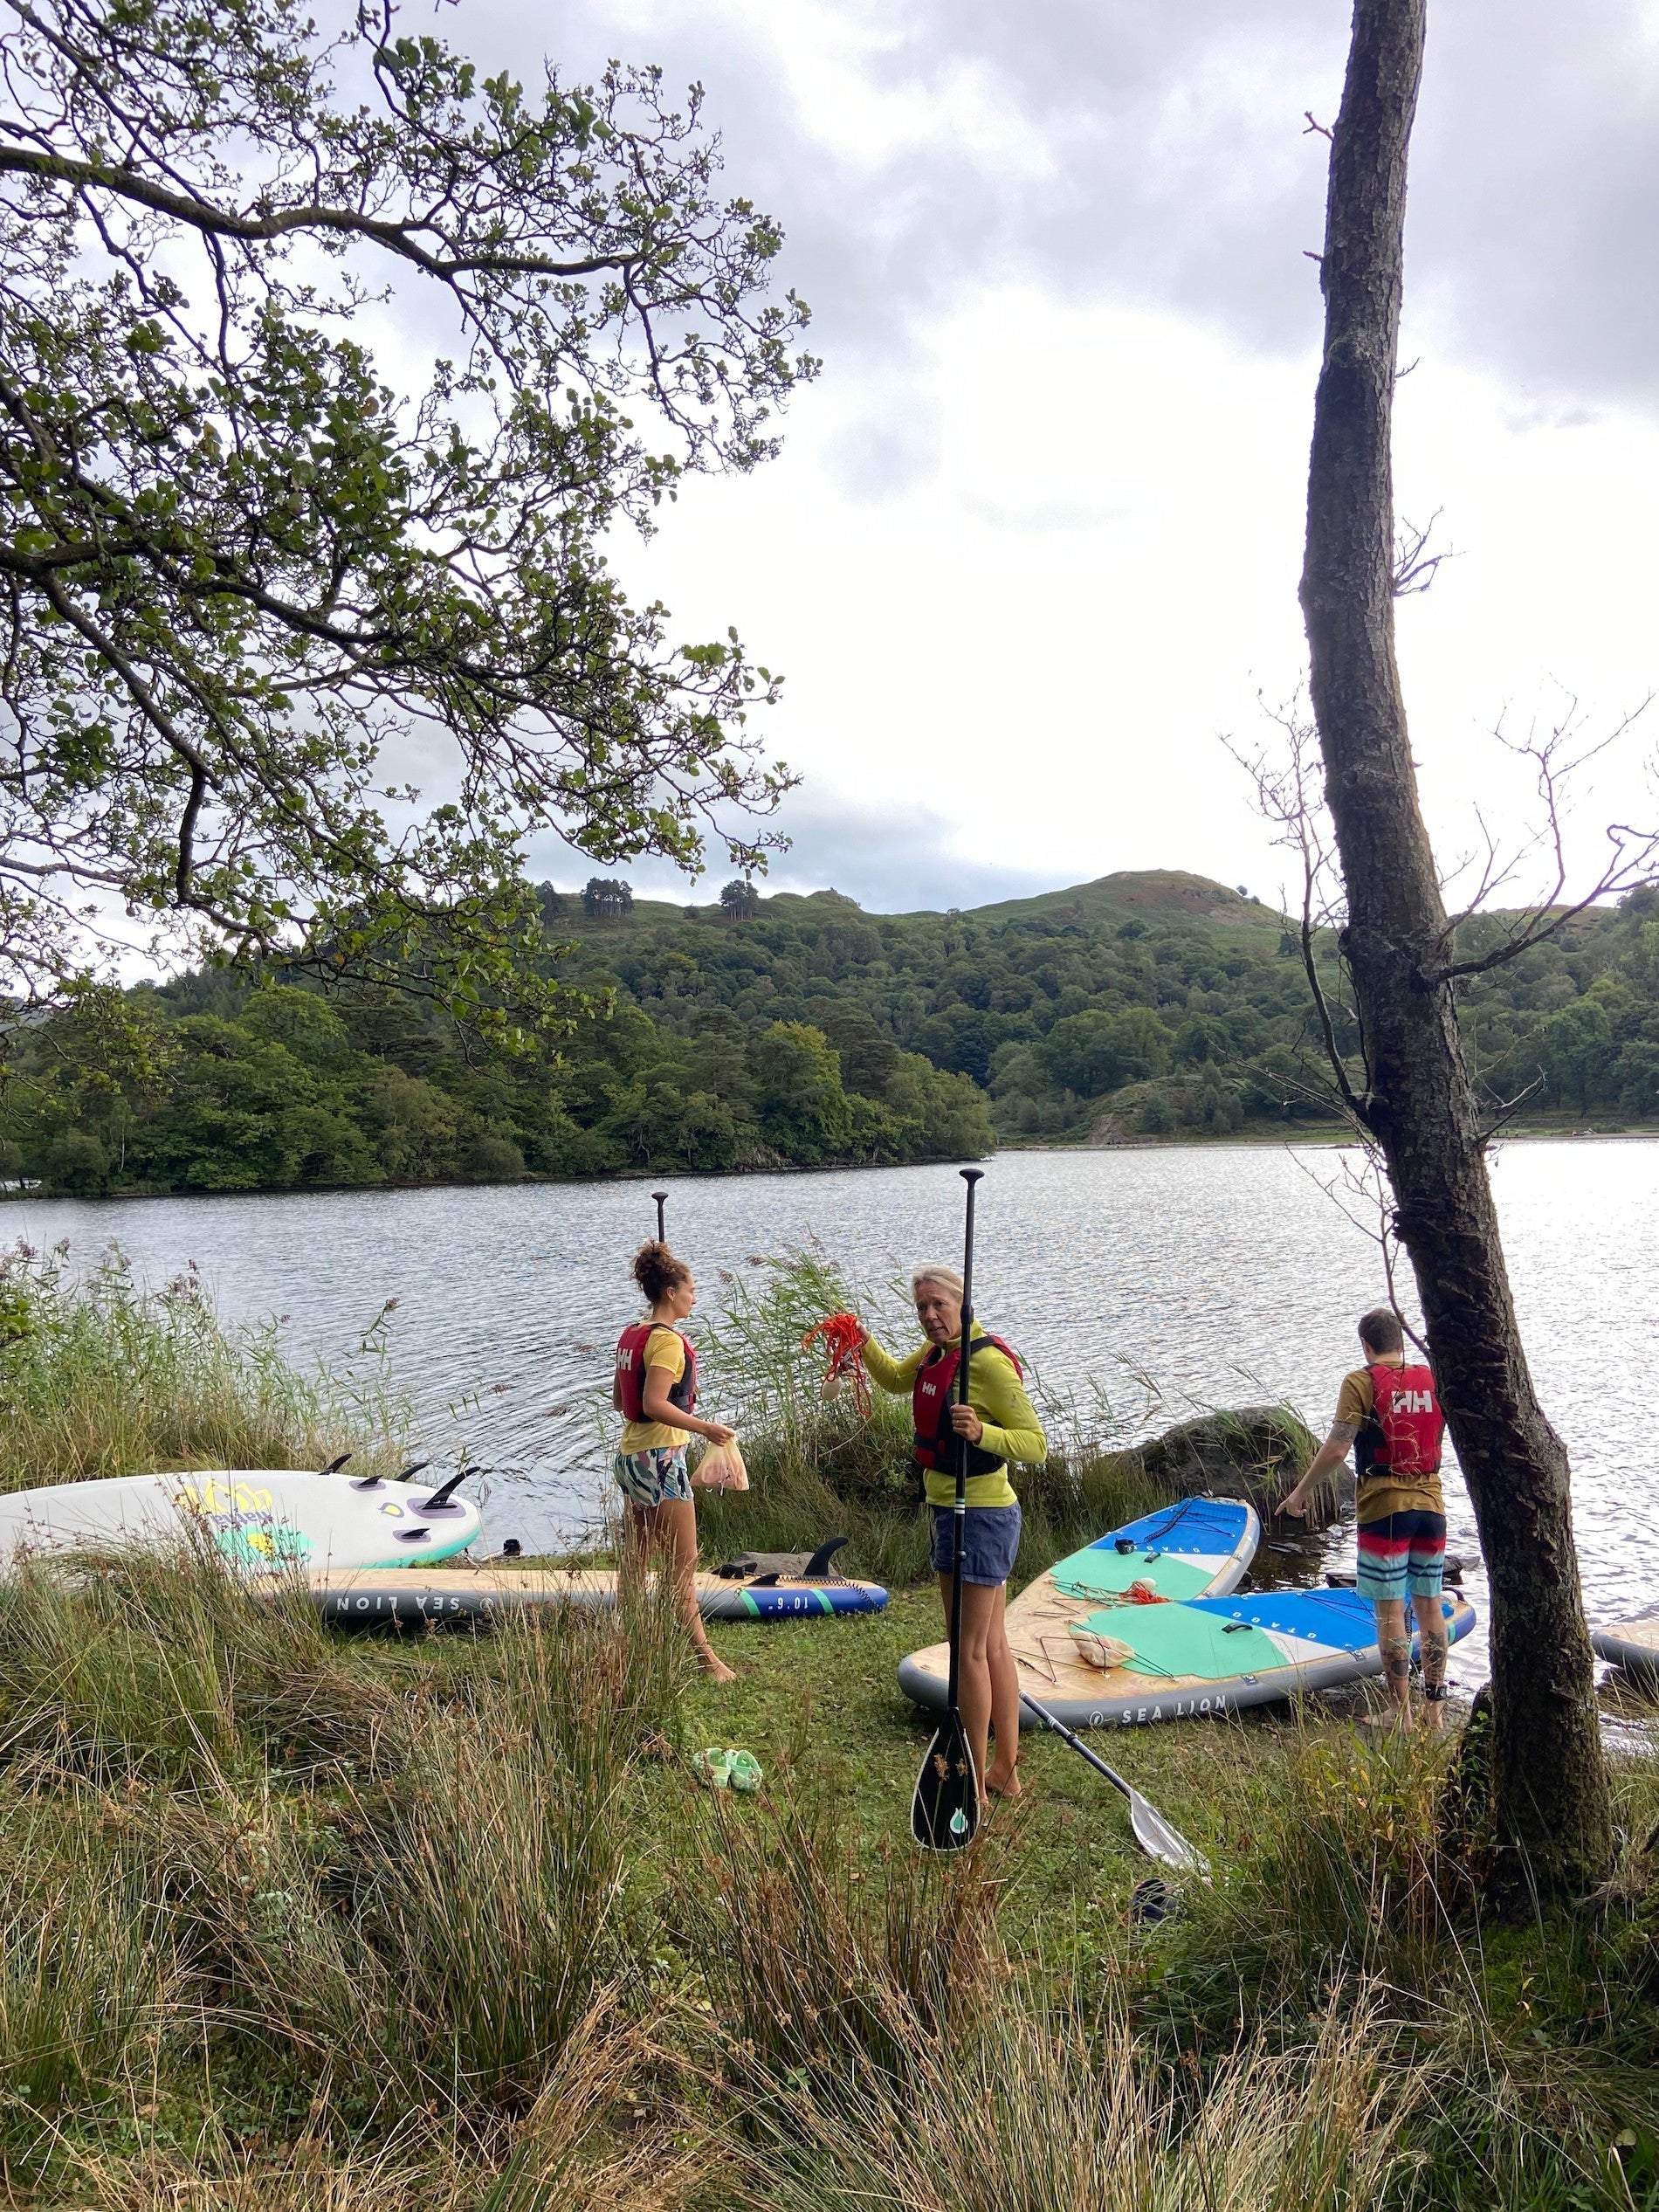 June 5-7th Yoga Retreat in the Lake District: yoga, paddle boarding, lakes & mountains